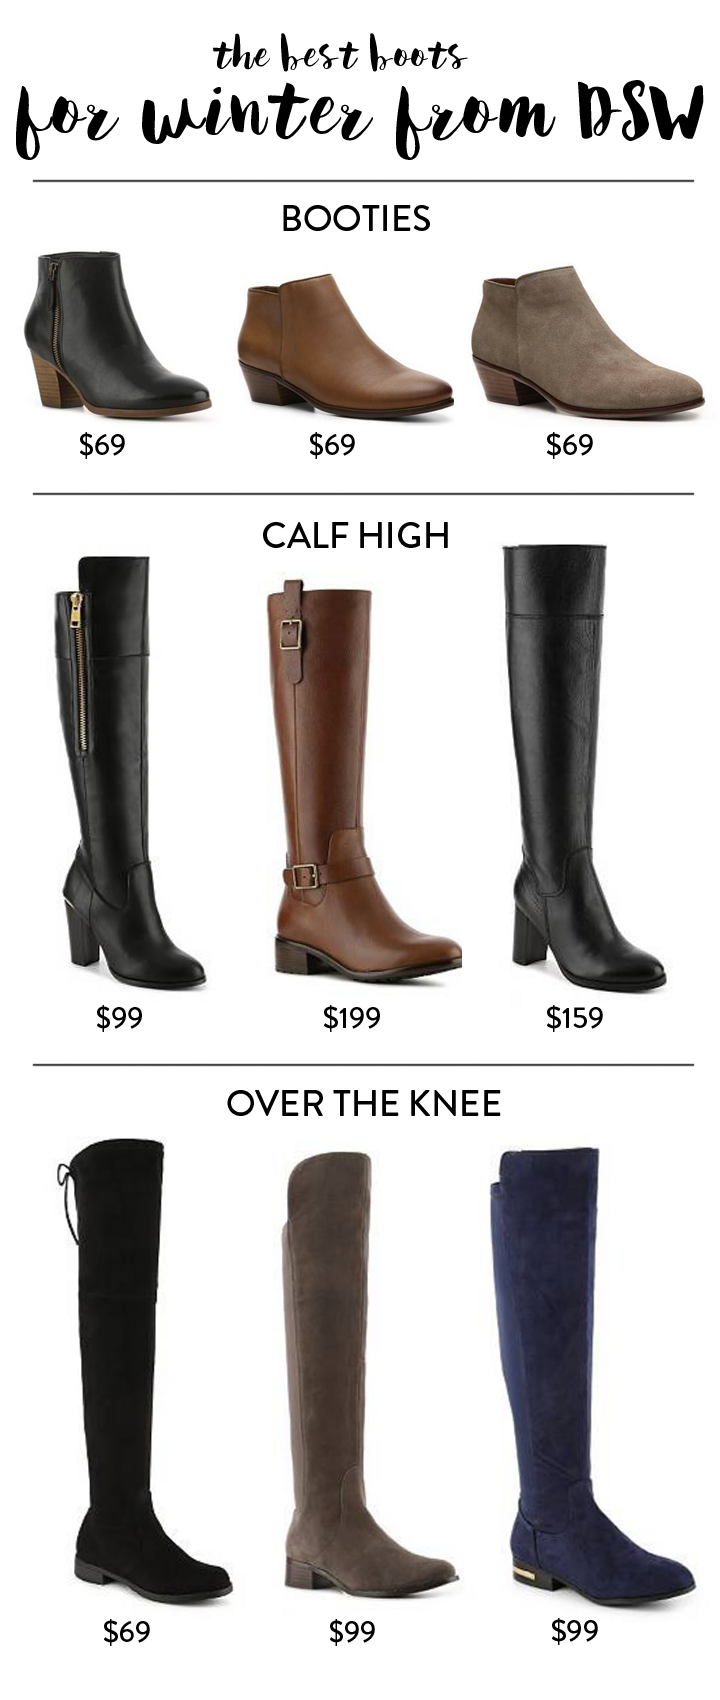 dsw riding boots cheap online